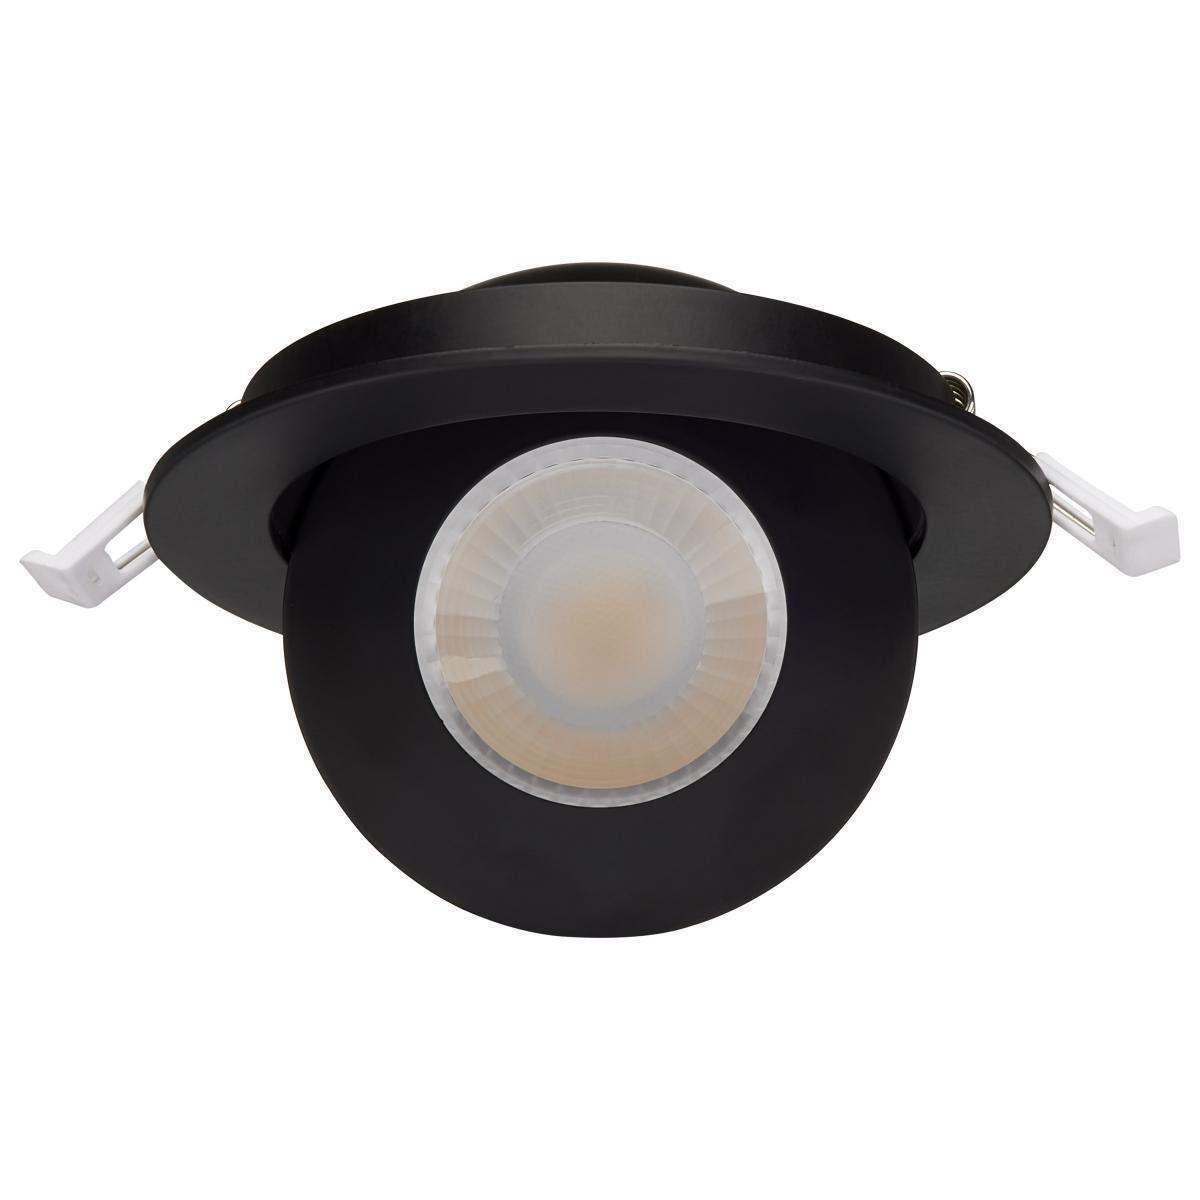 4 Inch Round Gimbal Downlight with Remote Driver, Round, 9 Watt, 750 Lumens, Selectable CCT, 2700K to 5000K, Black Finish - Bees Lighting